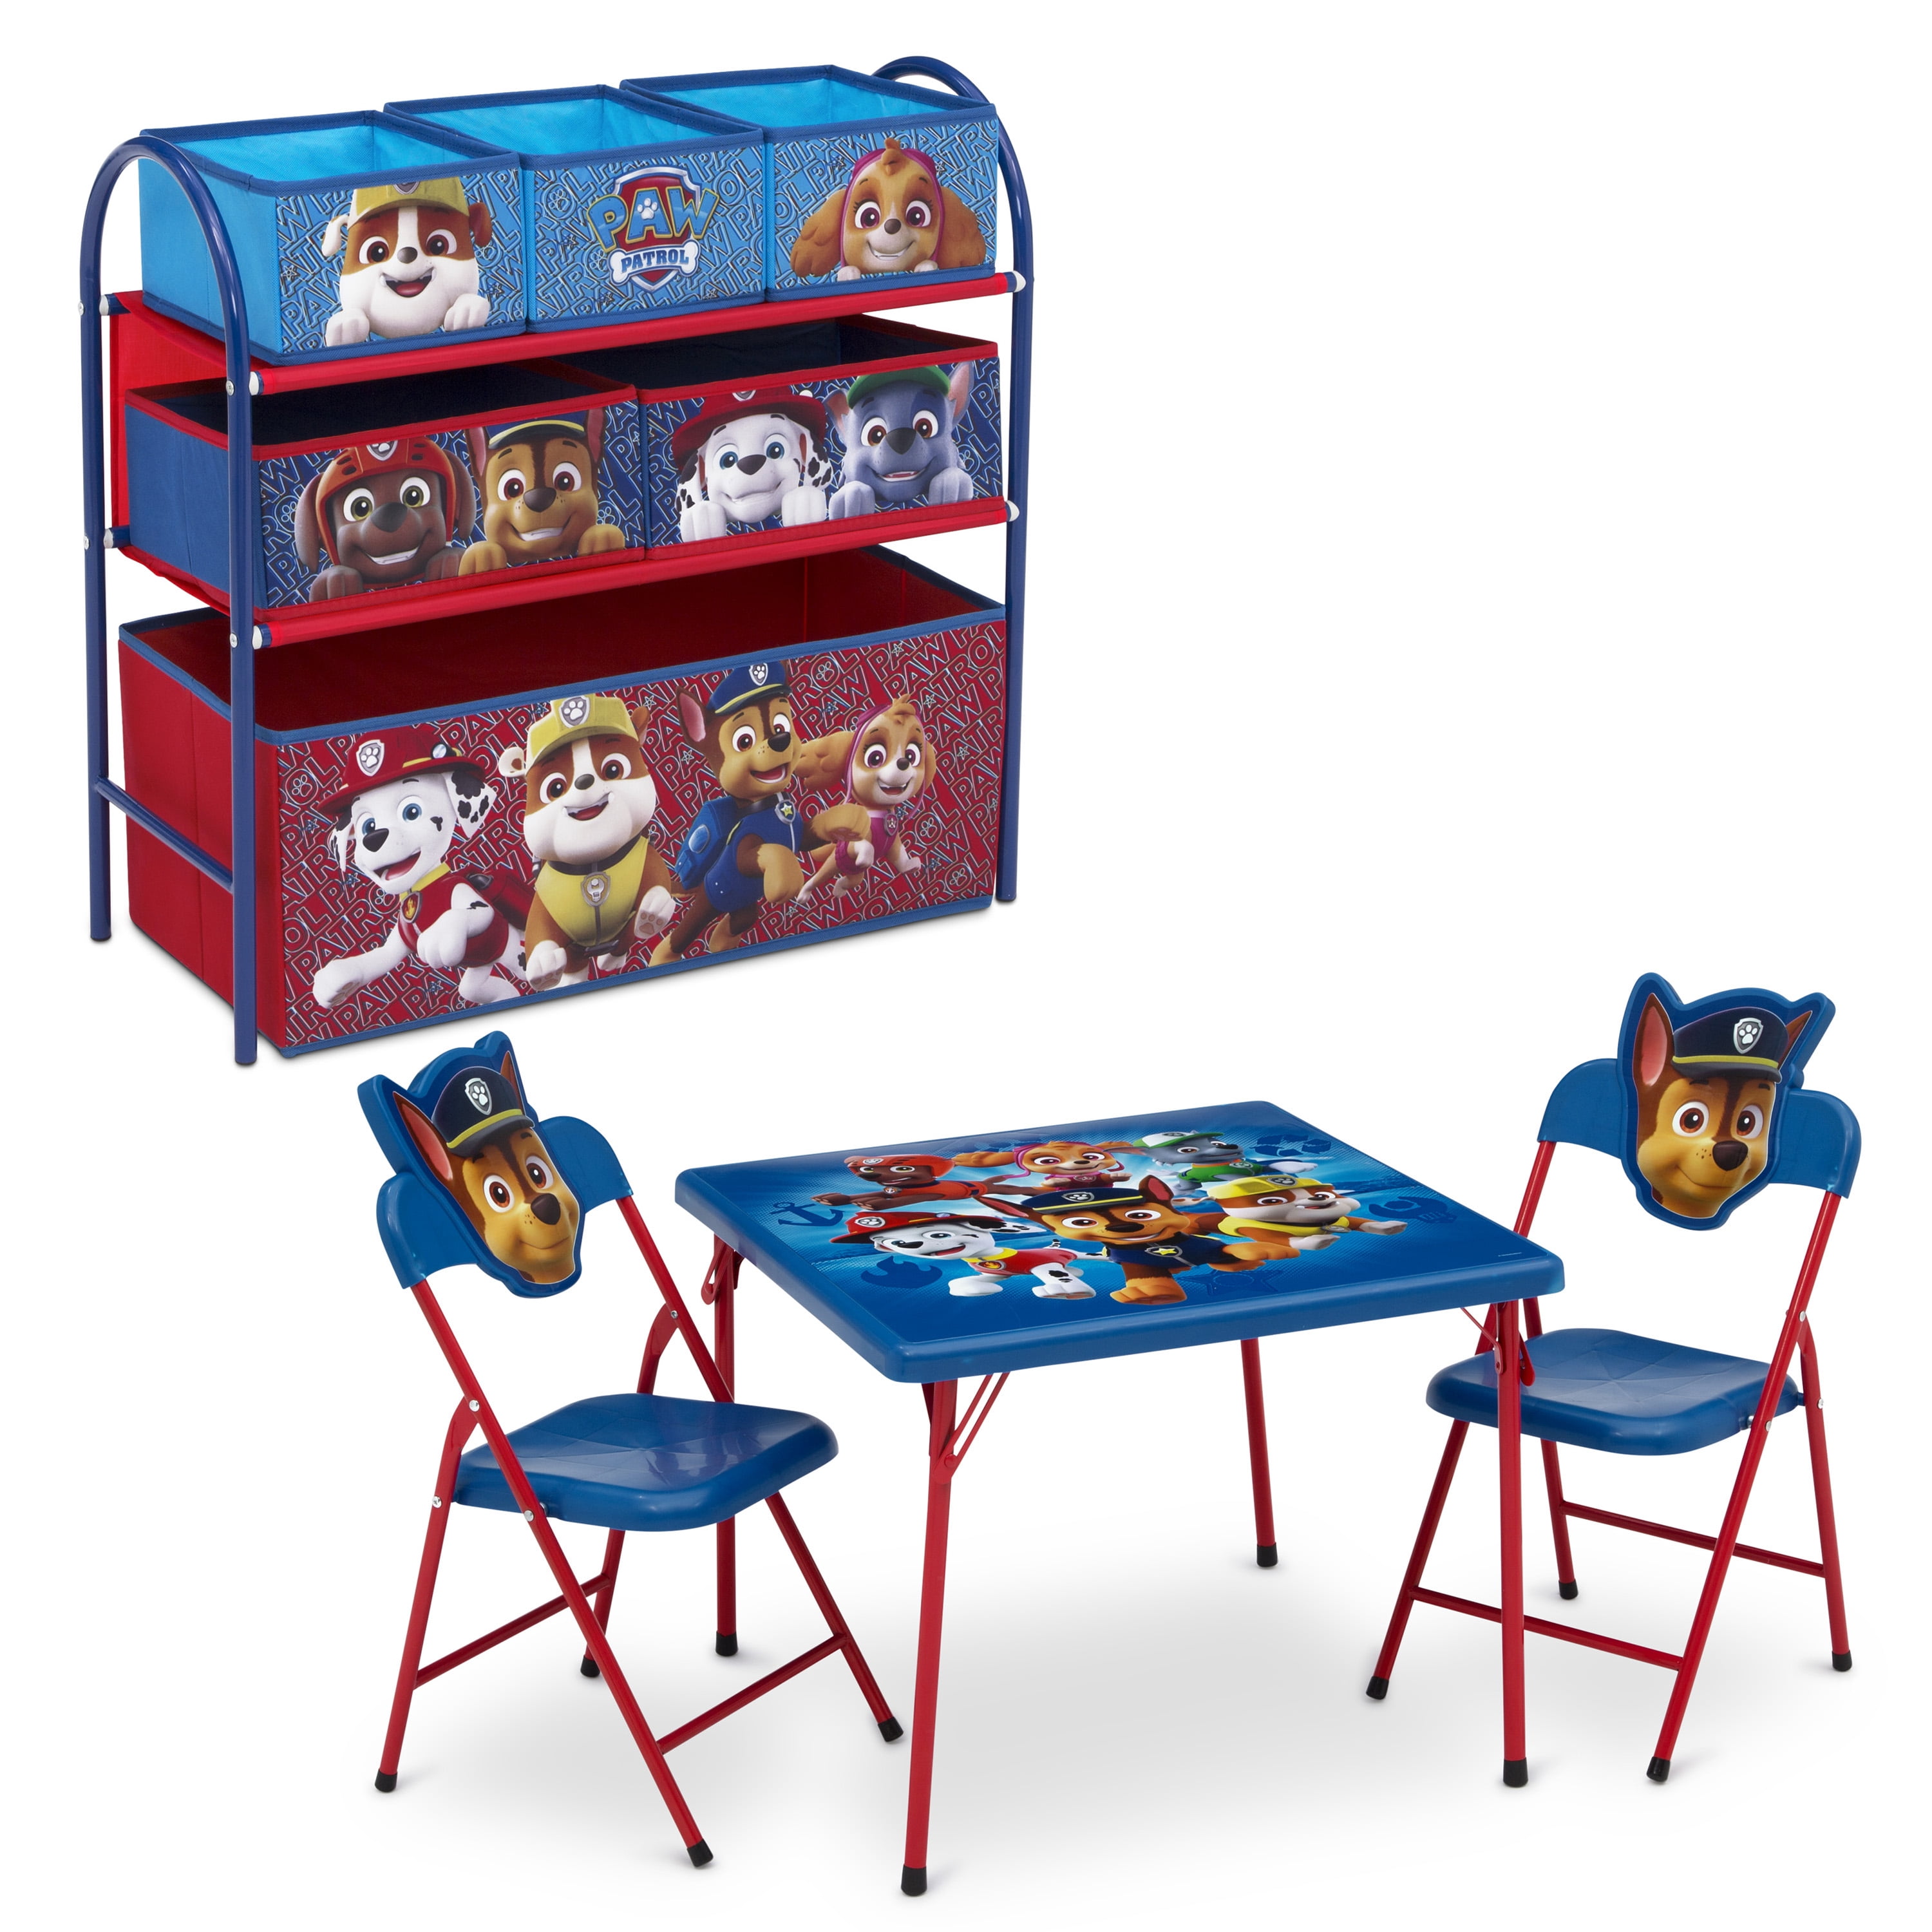 Paw Patrol Wooden Table And Chairs Childs Childrens Kids Playroom Furniture Set 